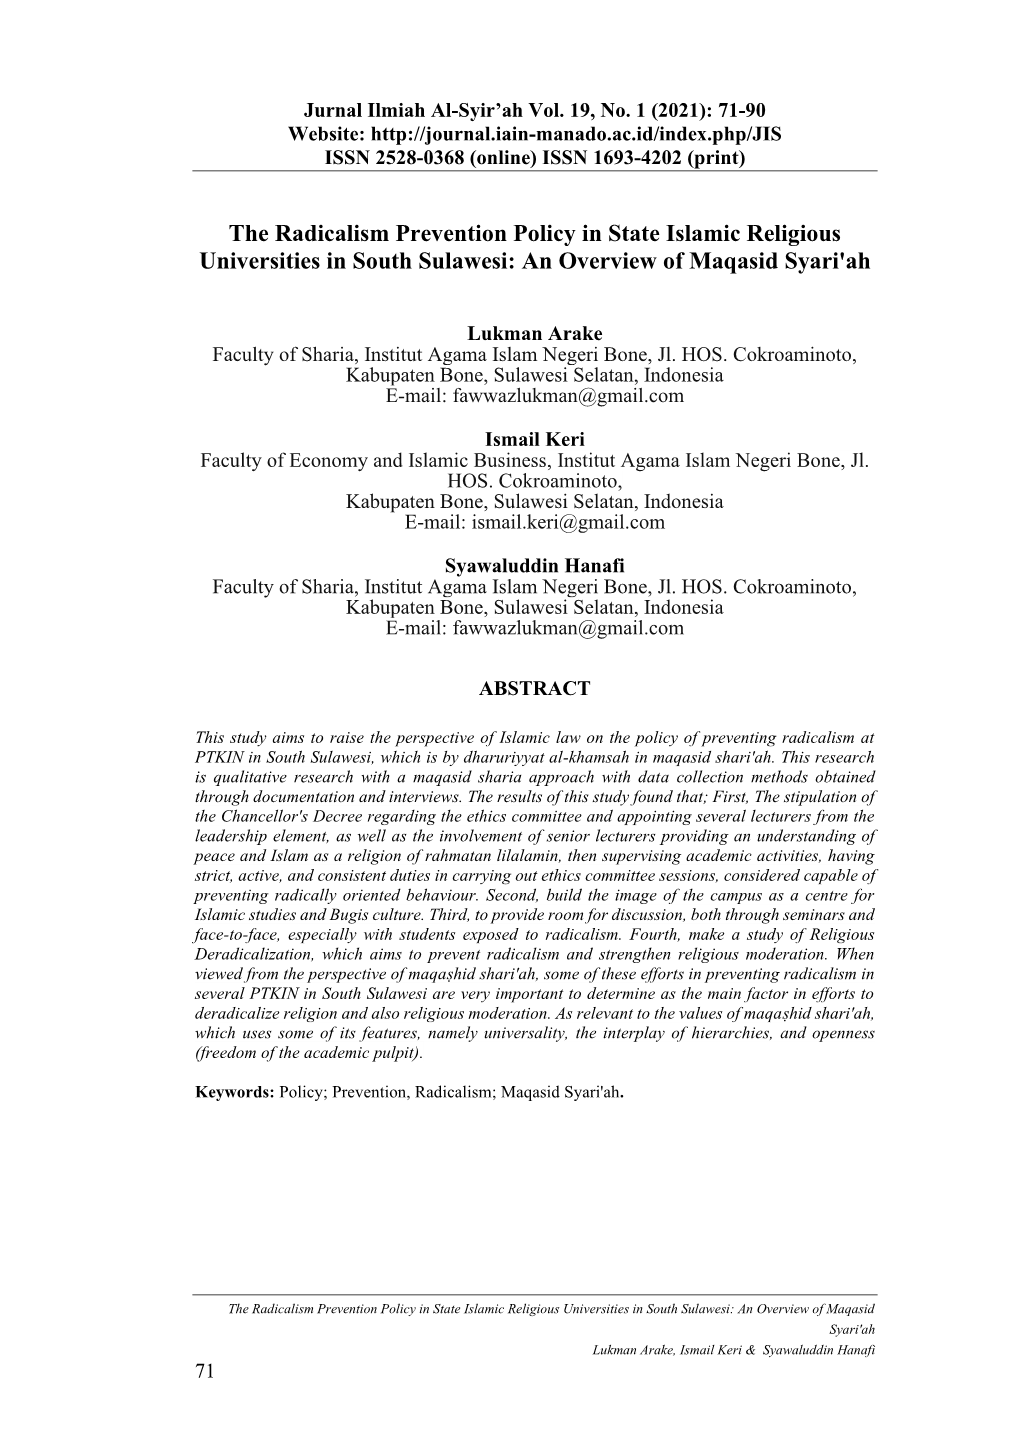 The Radicalism Prevention Policy in State Islamic Religious Universities in South Sulawesi: an Overview of Maqasid Syari'ah